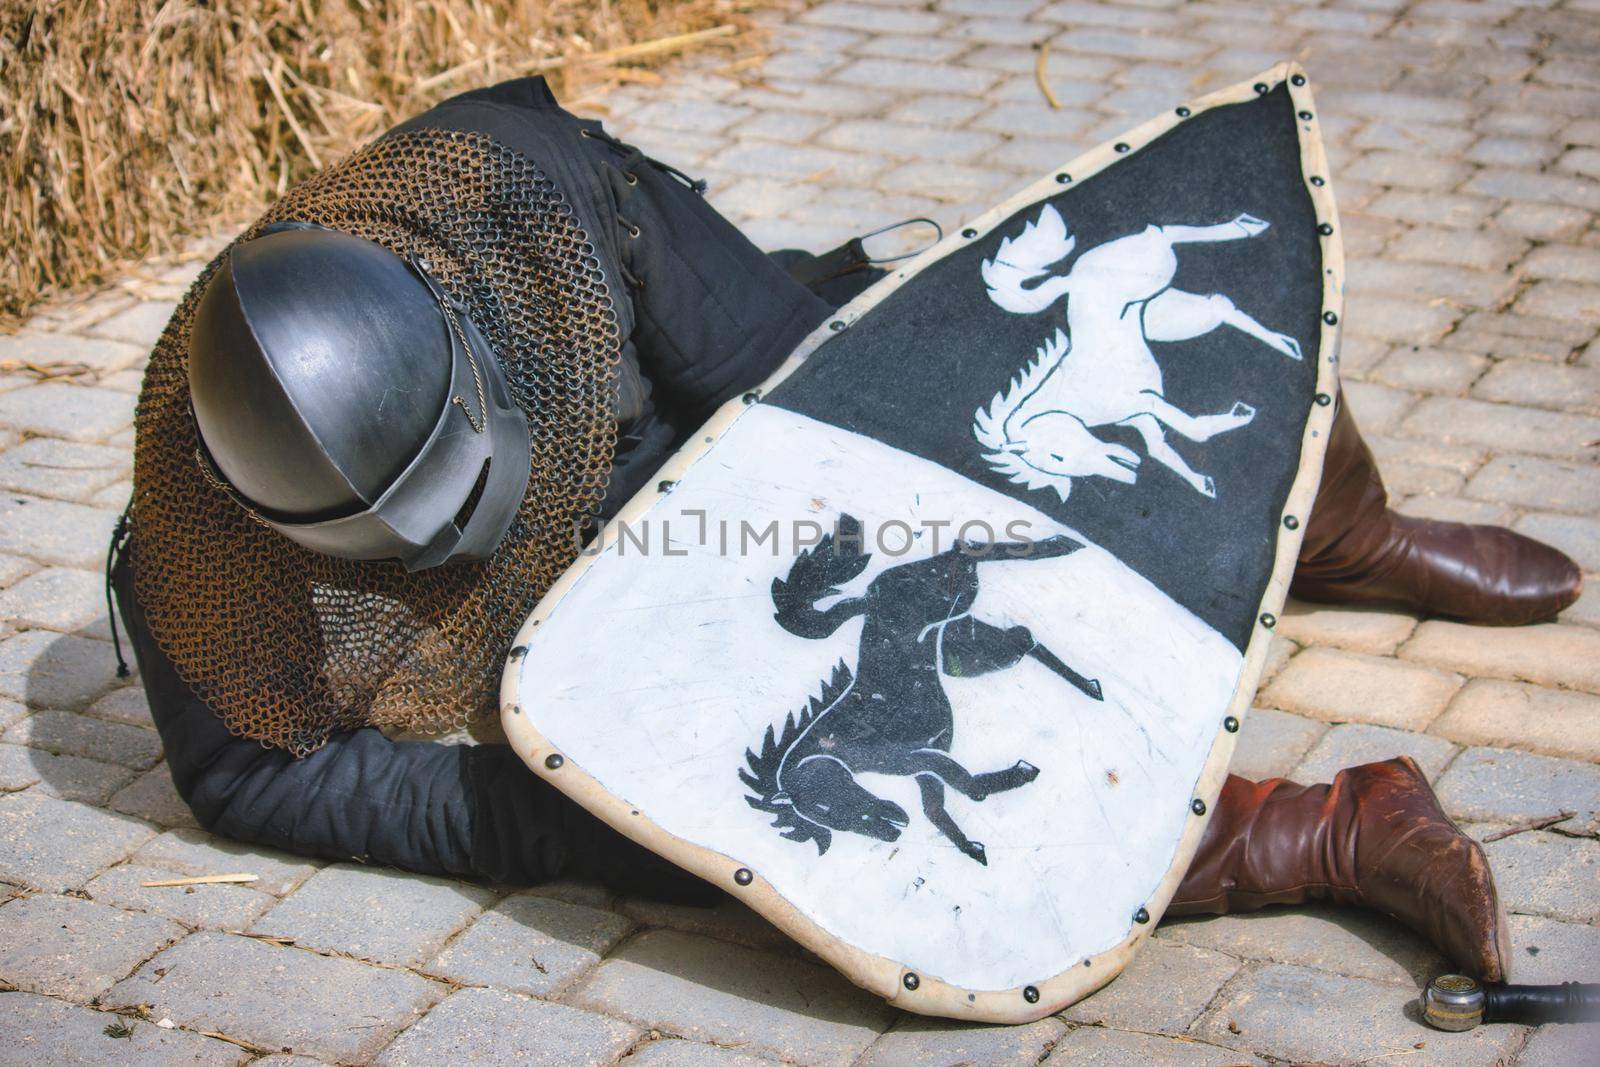 A medieval knight in full body armour lying injured on the ground